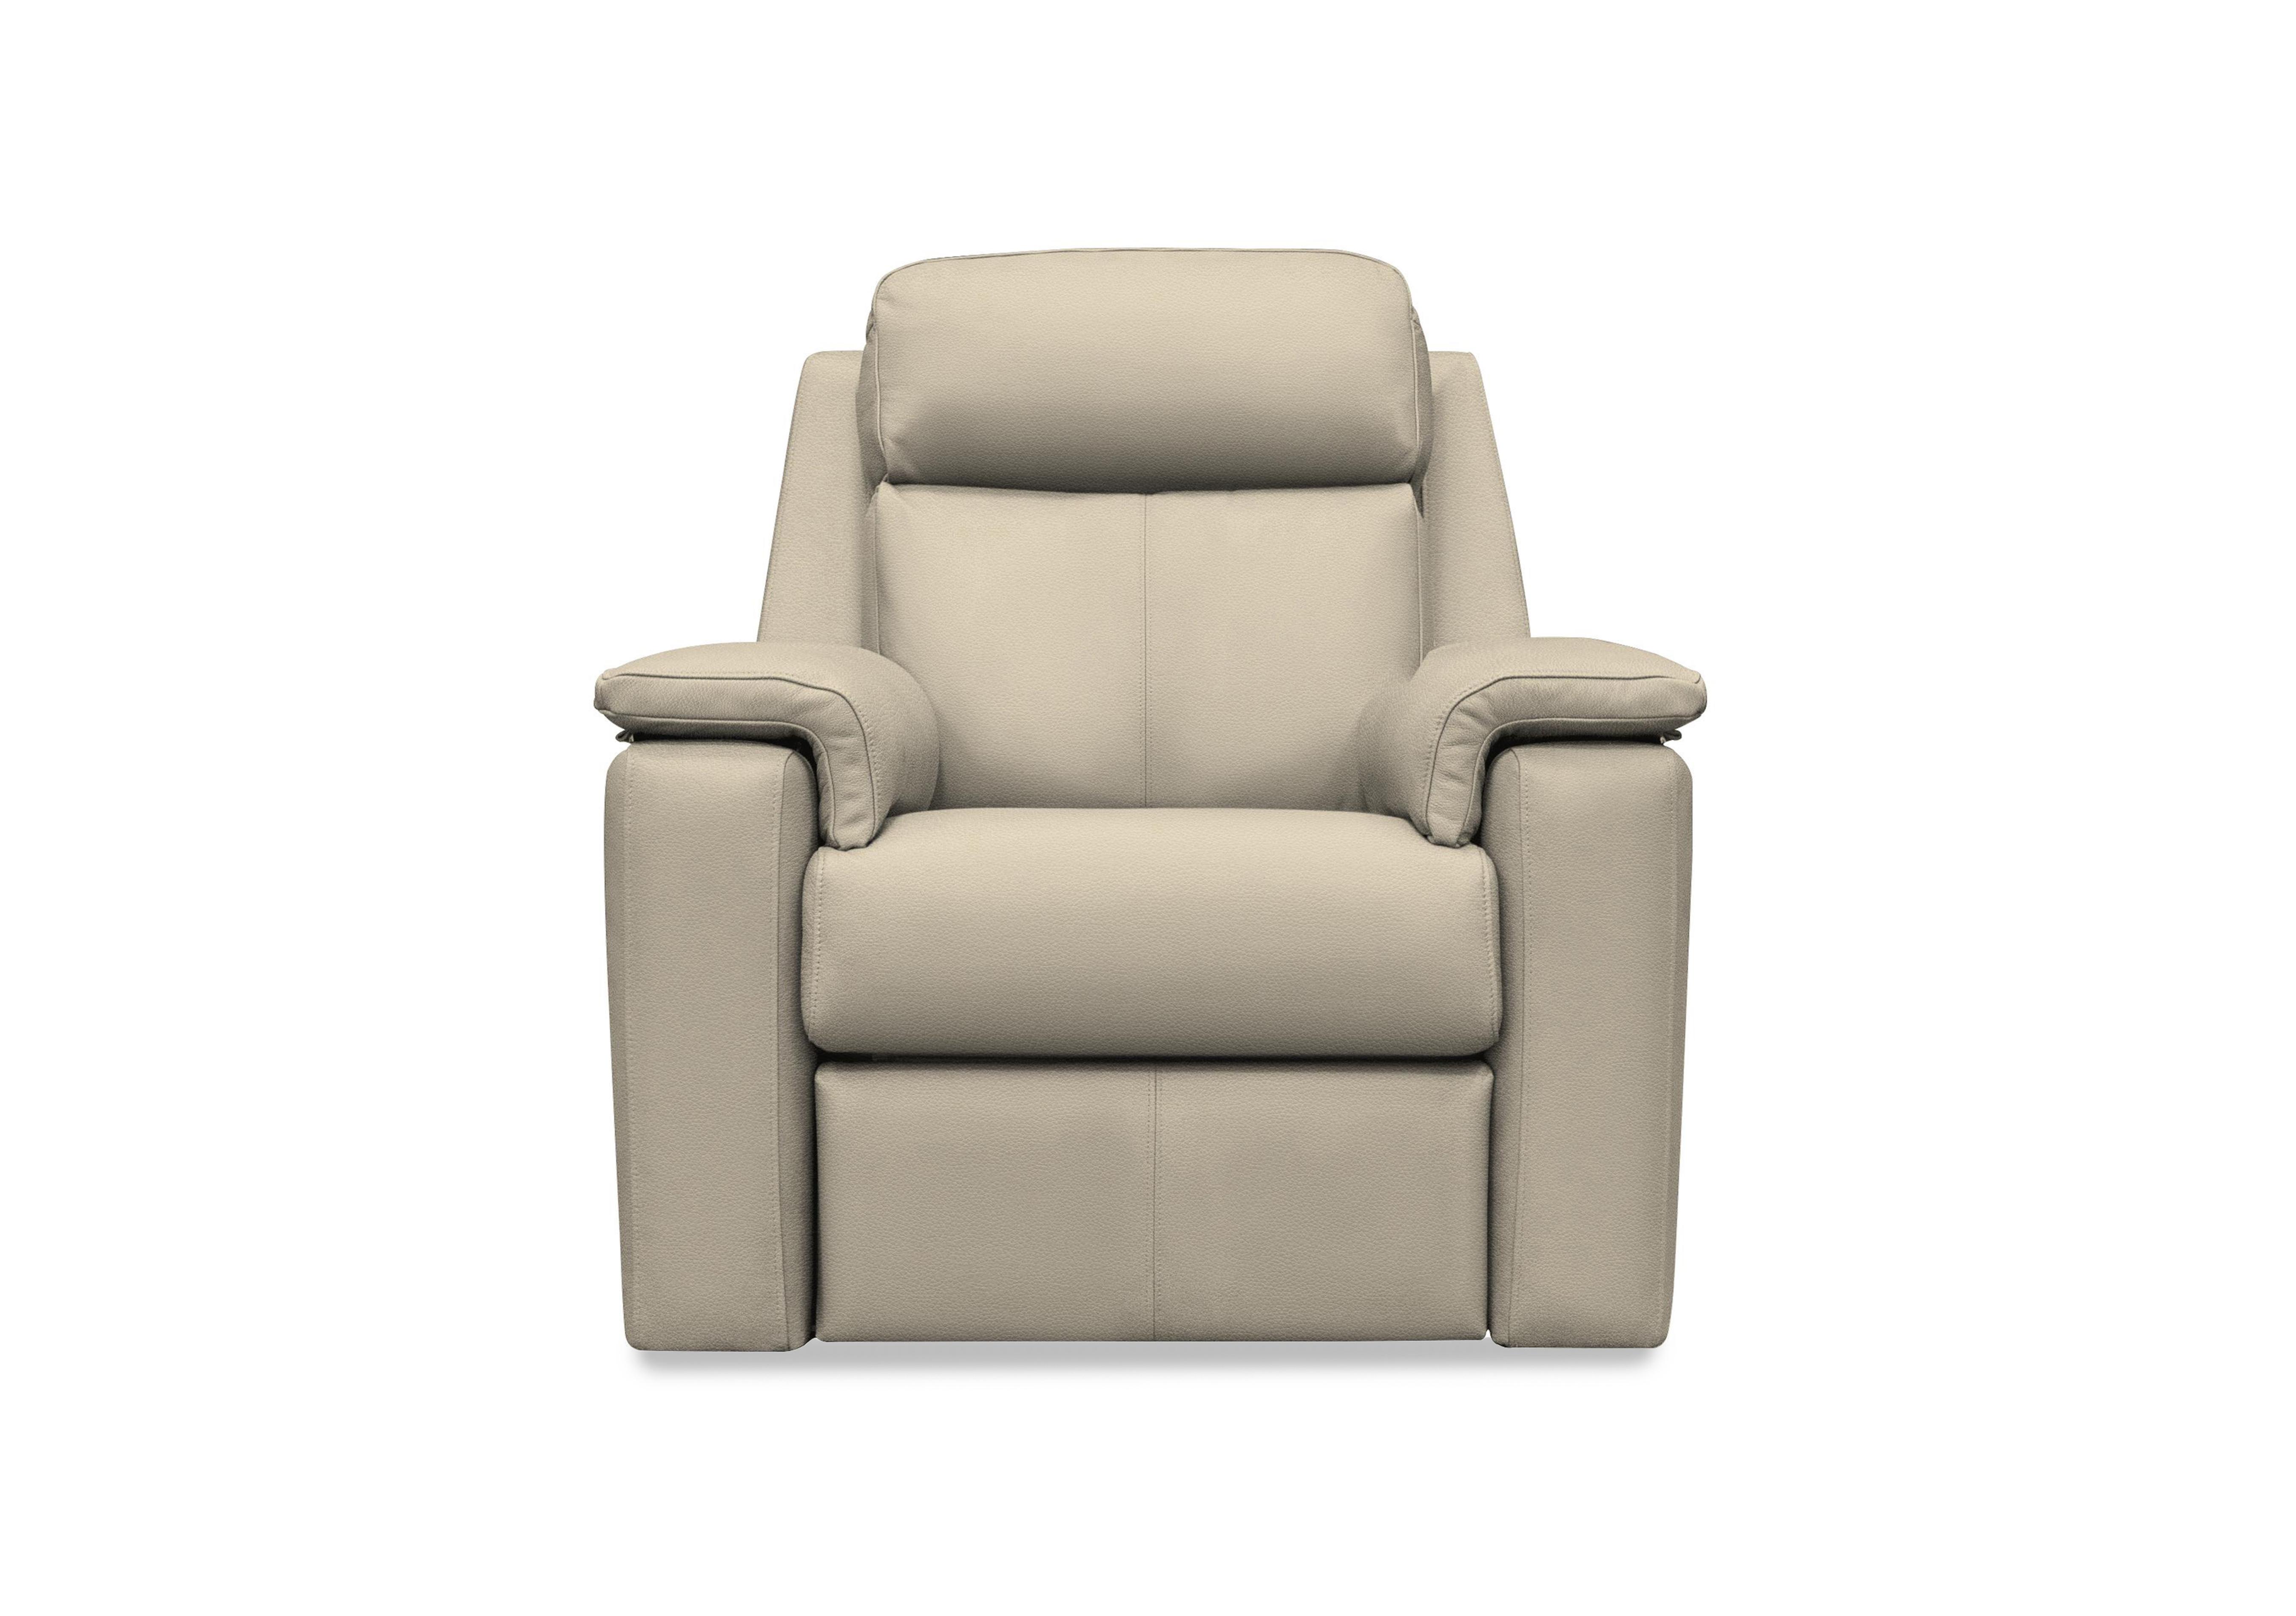 Thornbury Leather Power Recliner Chair with Power Headrest and Power Lumbar in H001 Oxford Mushroom on Furniture Village